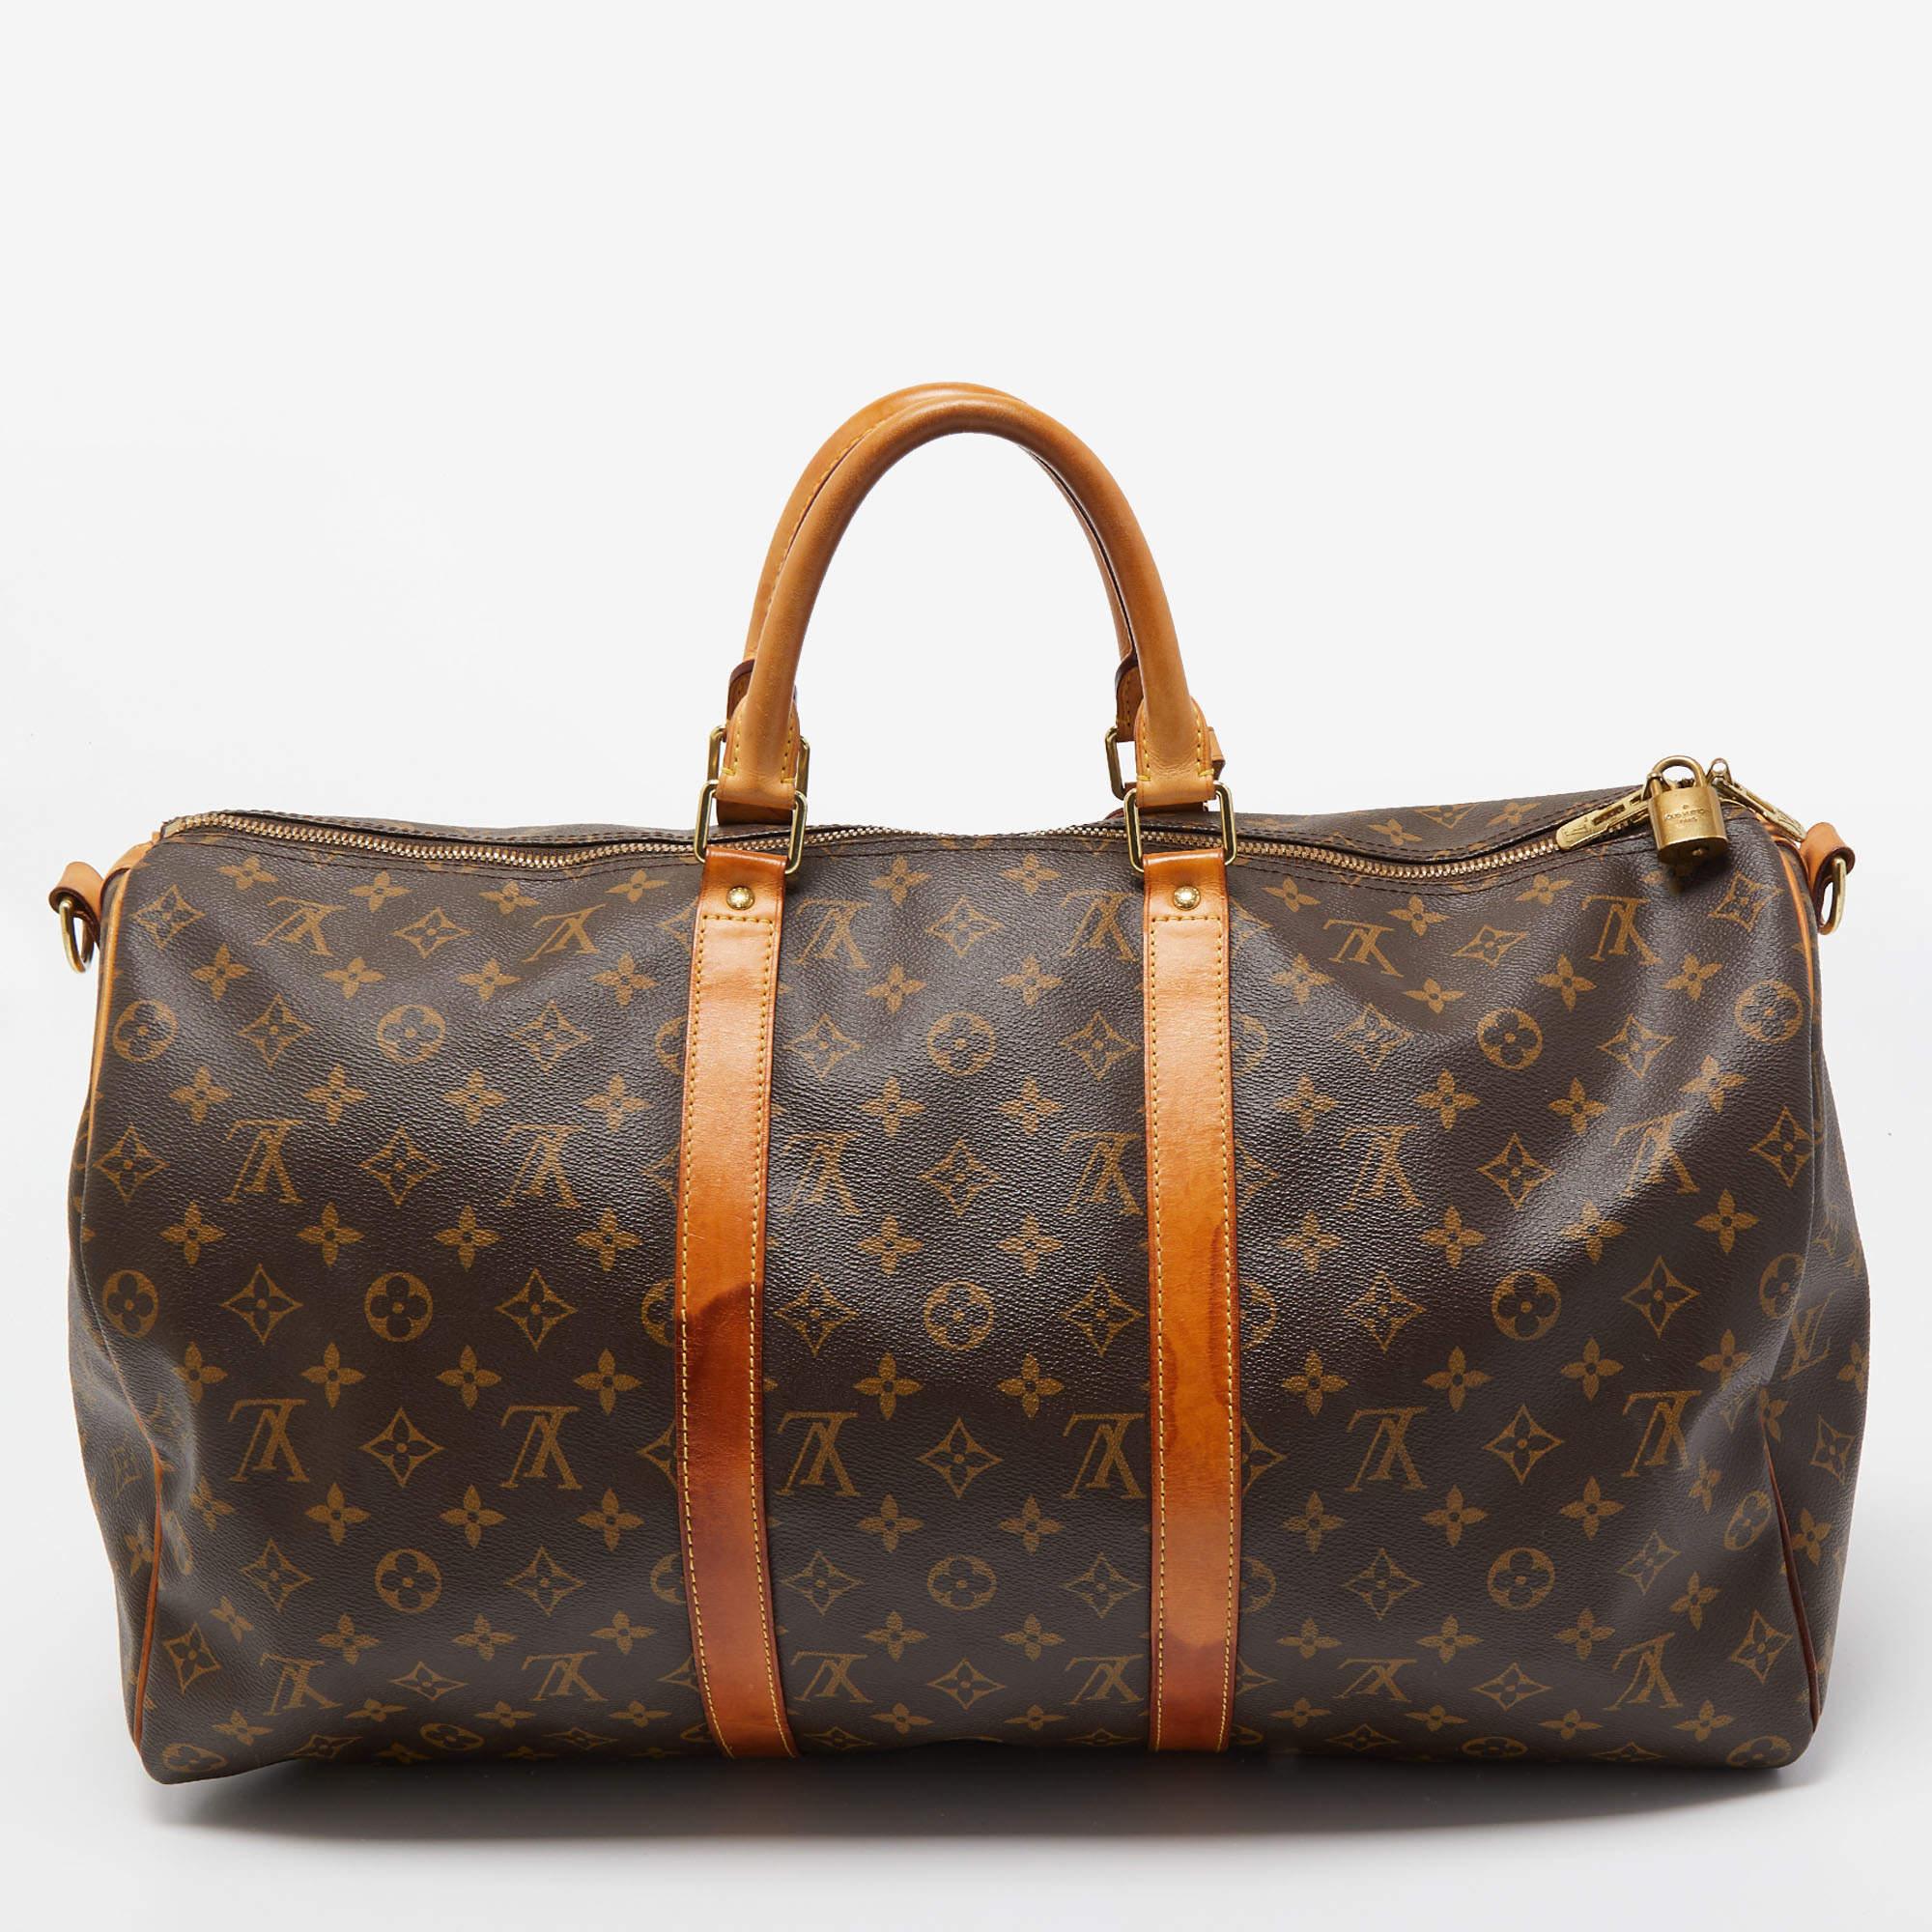 Louis Vuitton's bags are popular owing to their high style and functionality. This bag, like all their designs, is durable and stylish. Exuding a fine finish, it is designed to give a luxurious experience.

Includes: Detachable Strap, Original